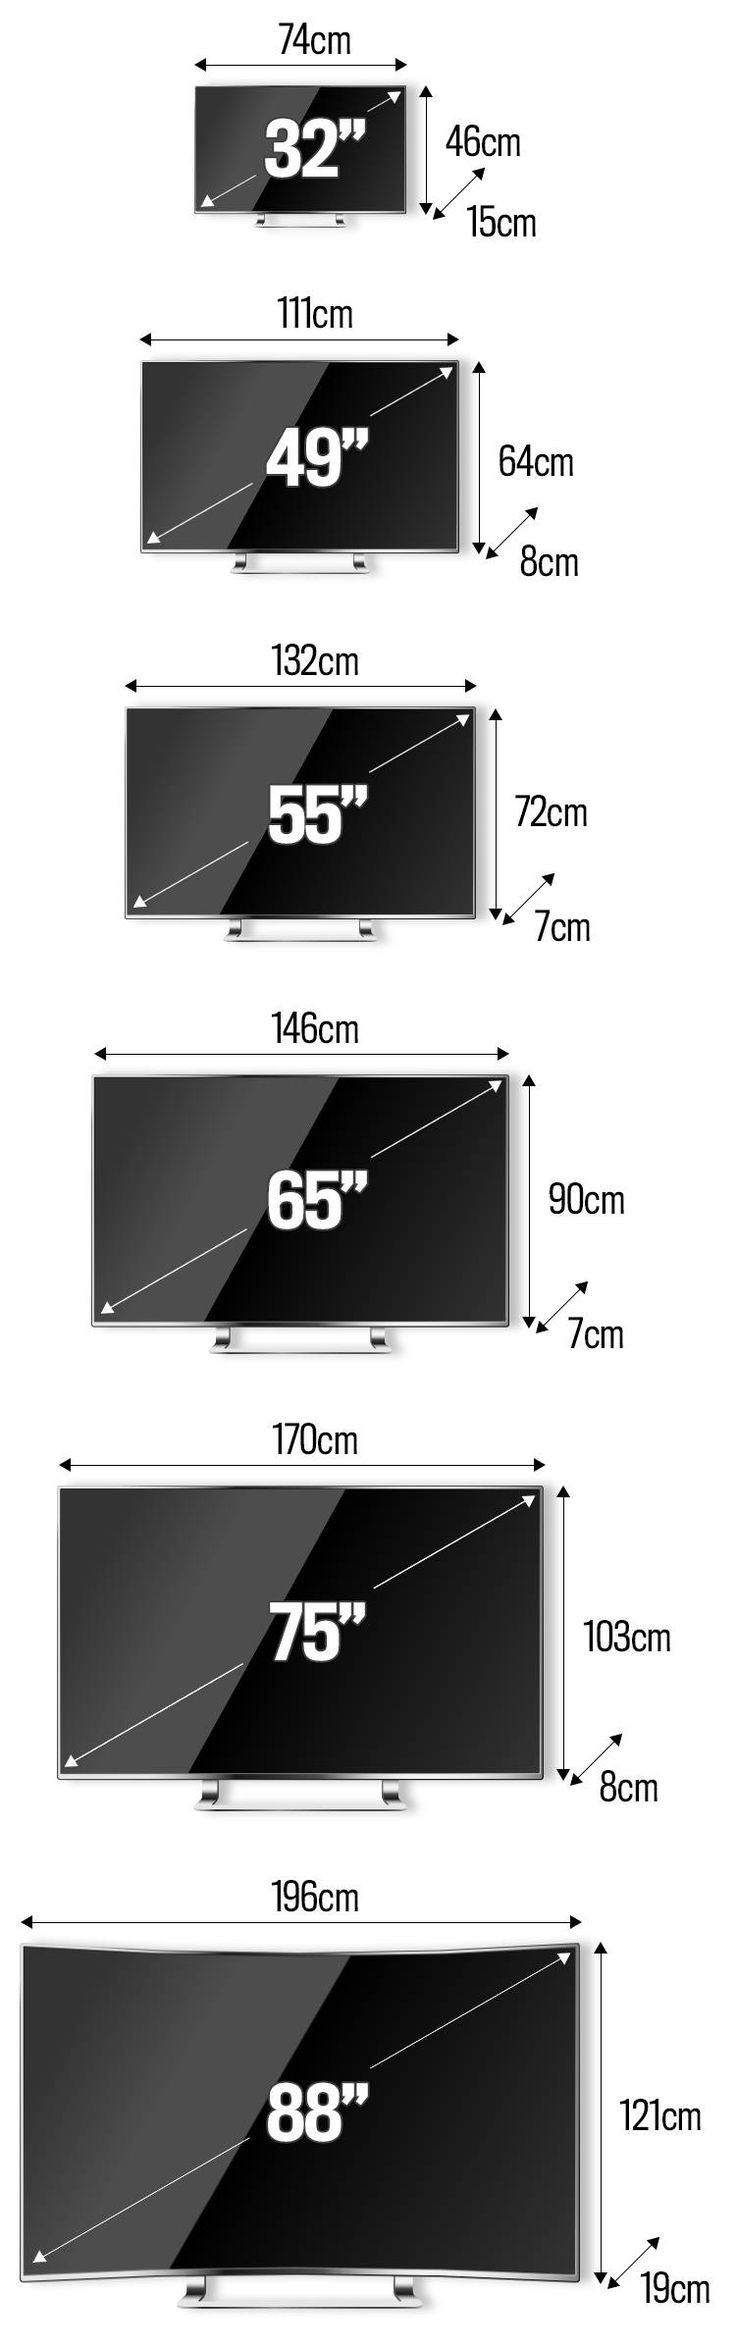 How to Measure the Screen Size of a Flat-Screen TV